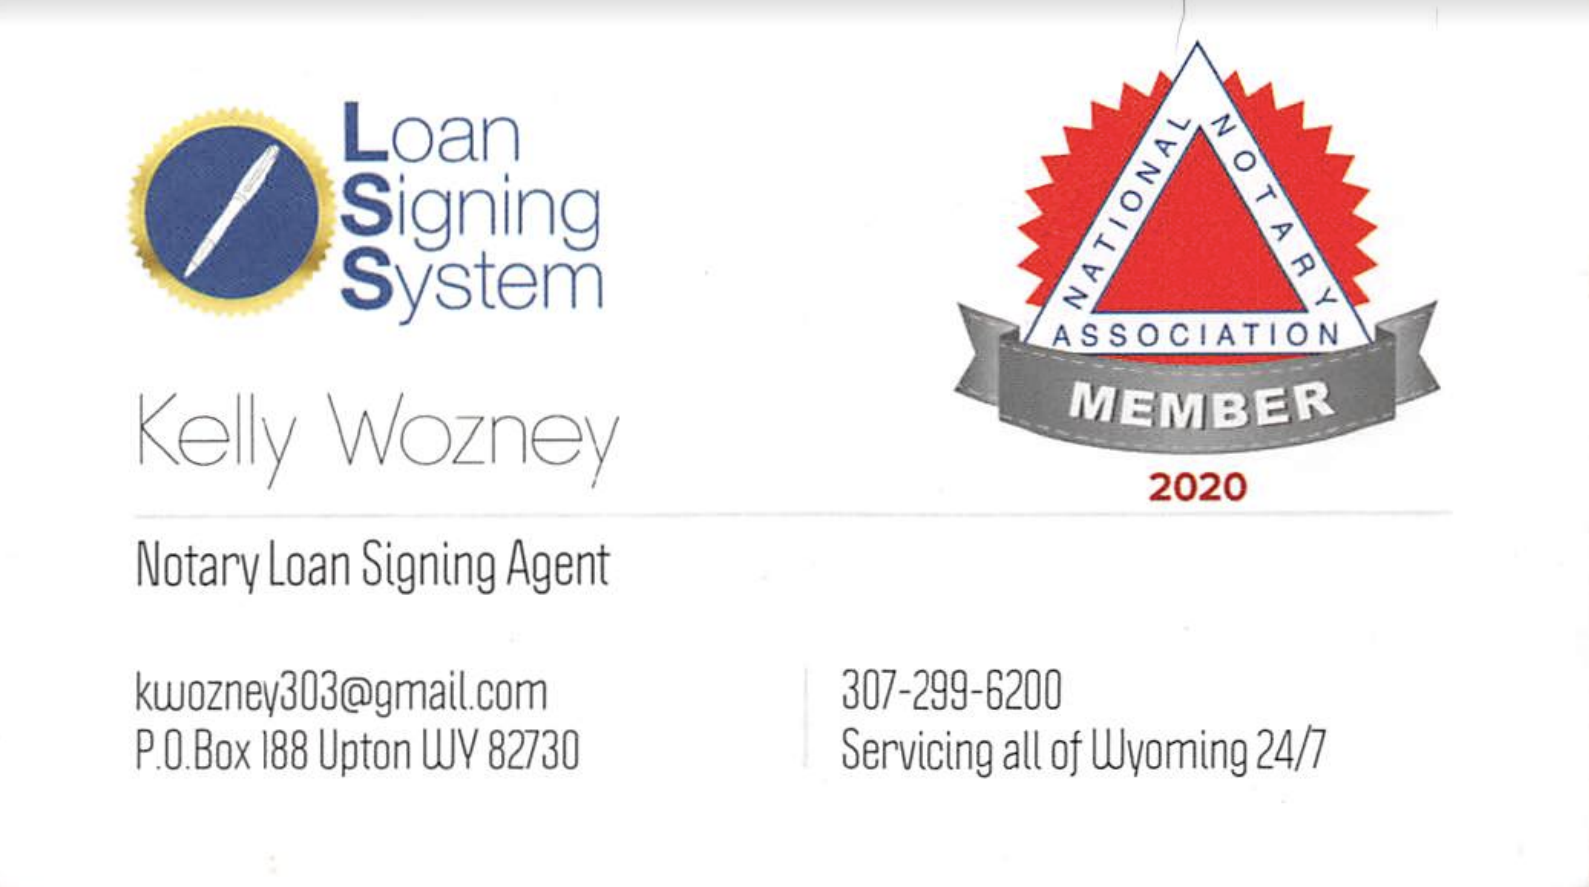 Kelly Wozney - Loan Signing Agent/Mobile Notary's Image